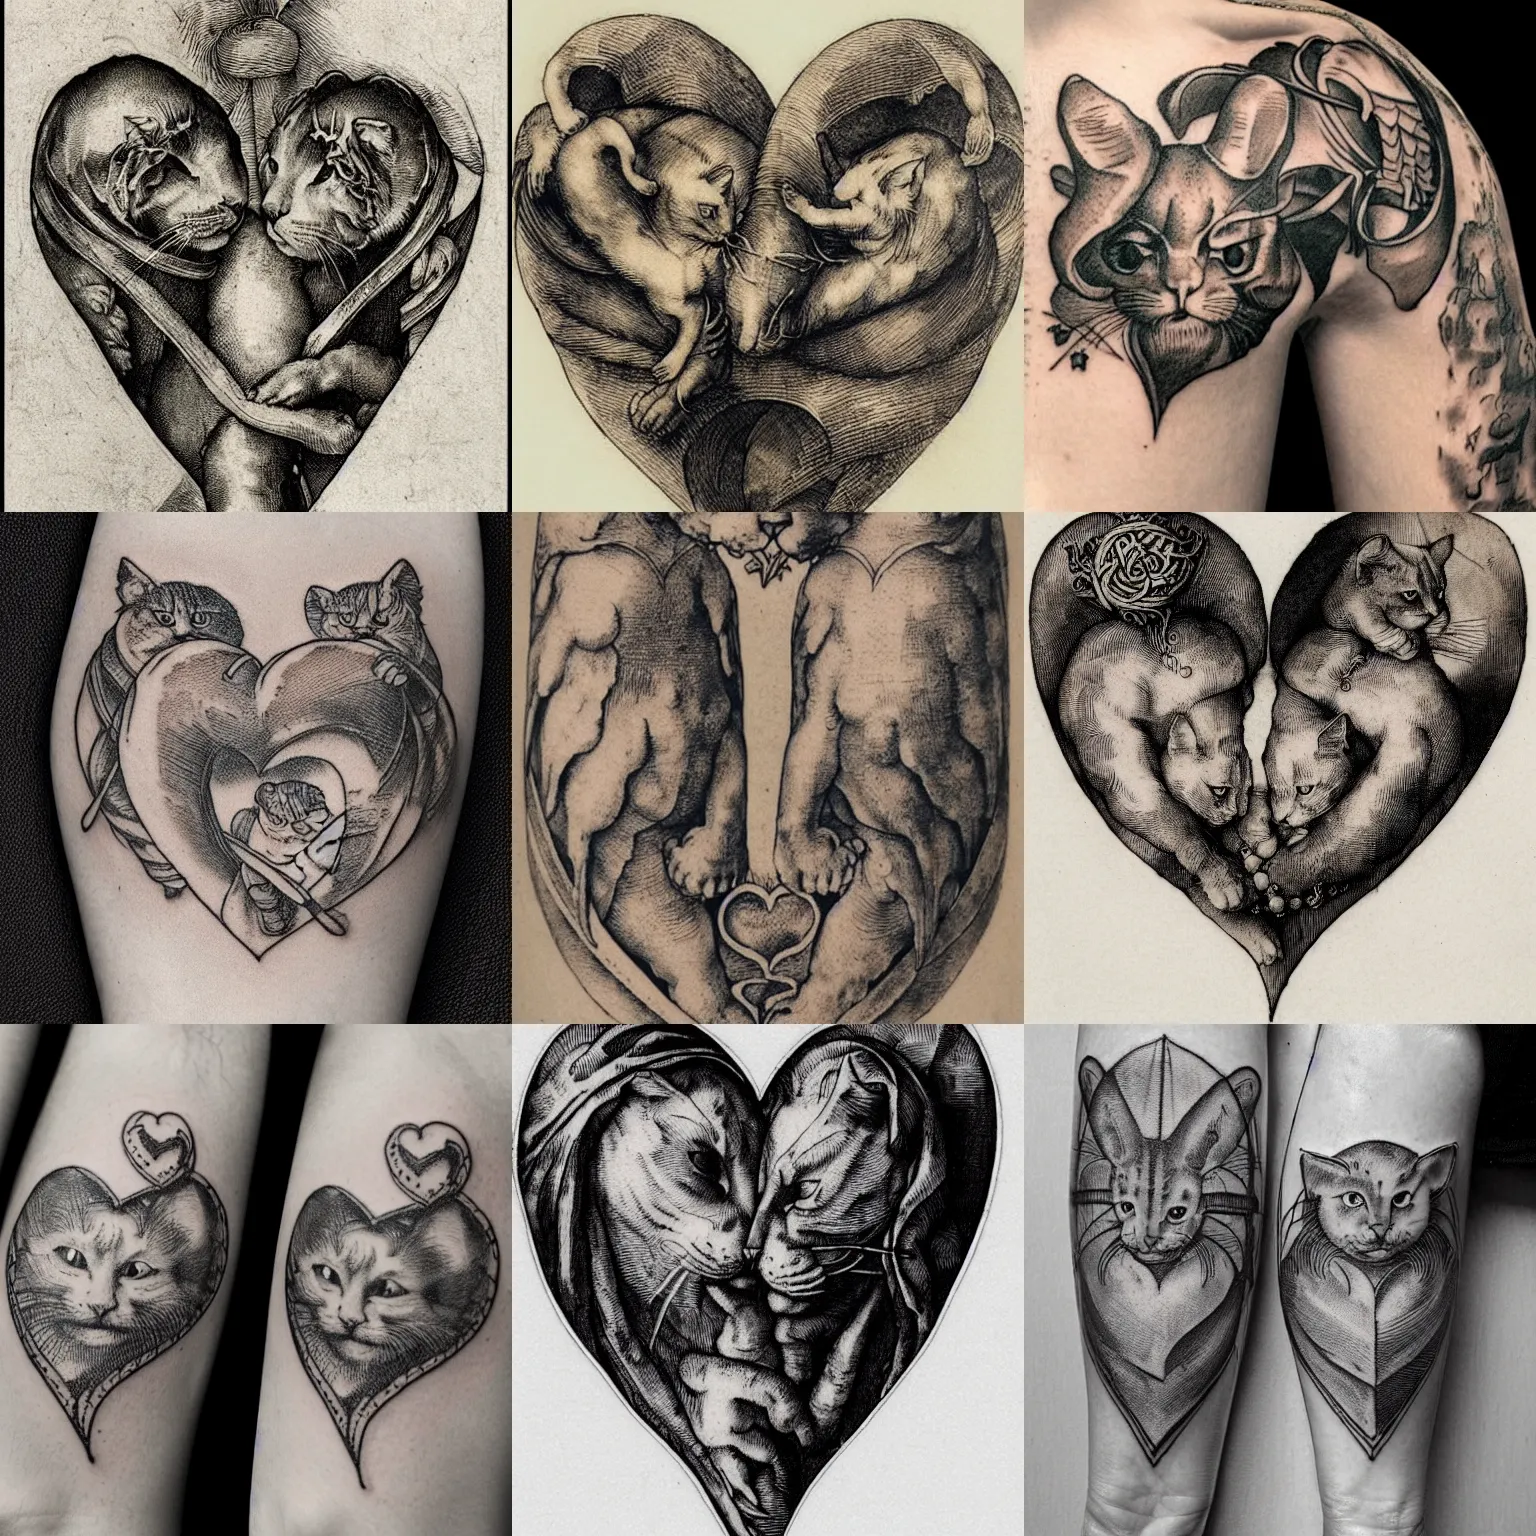 Prompt: albrecht durer, albrecht altdorfer, hans holbein, lucas cranach, gustave dore, engraving-style tattoo of two cats intertwined in a heart shape